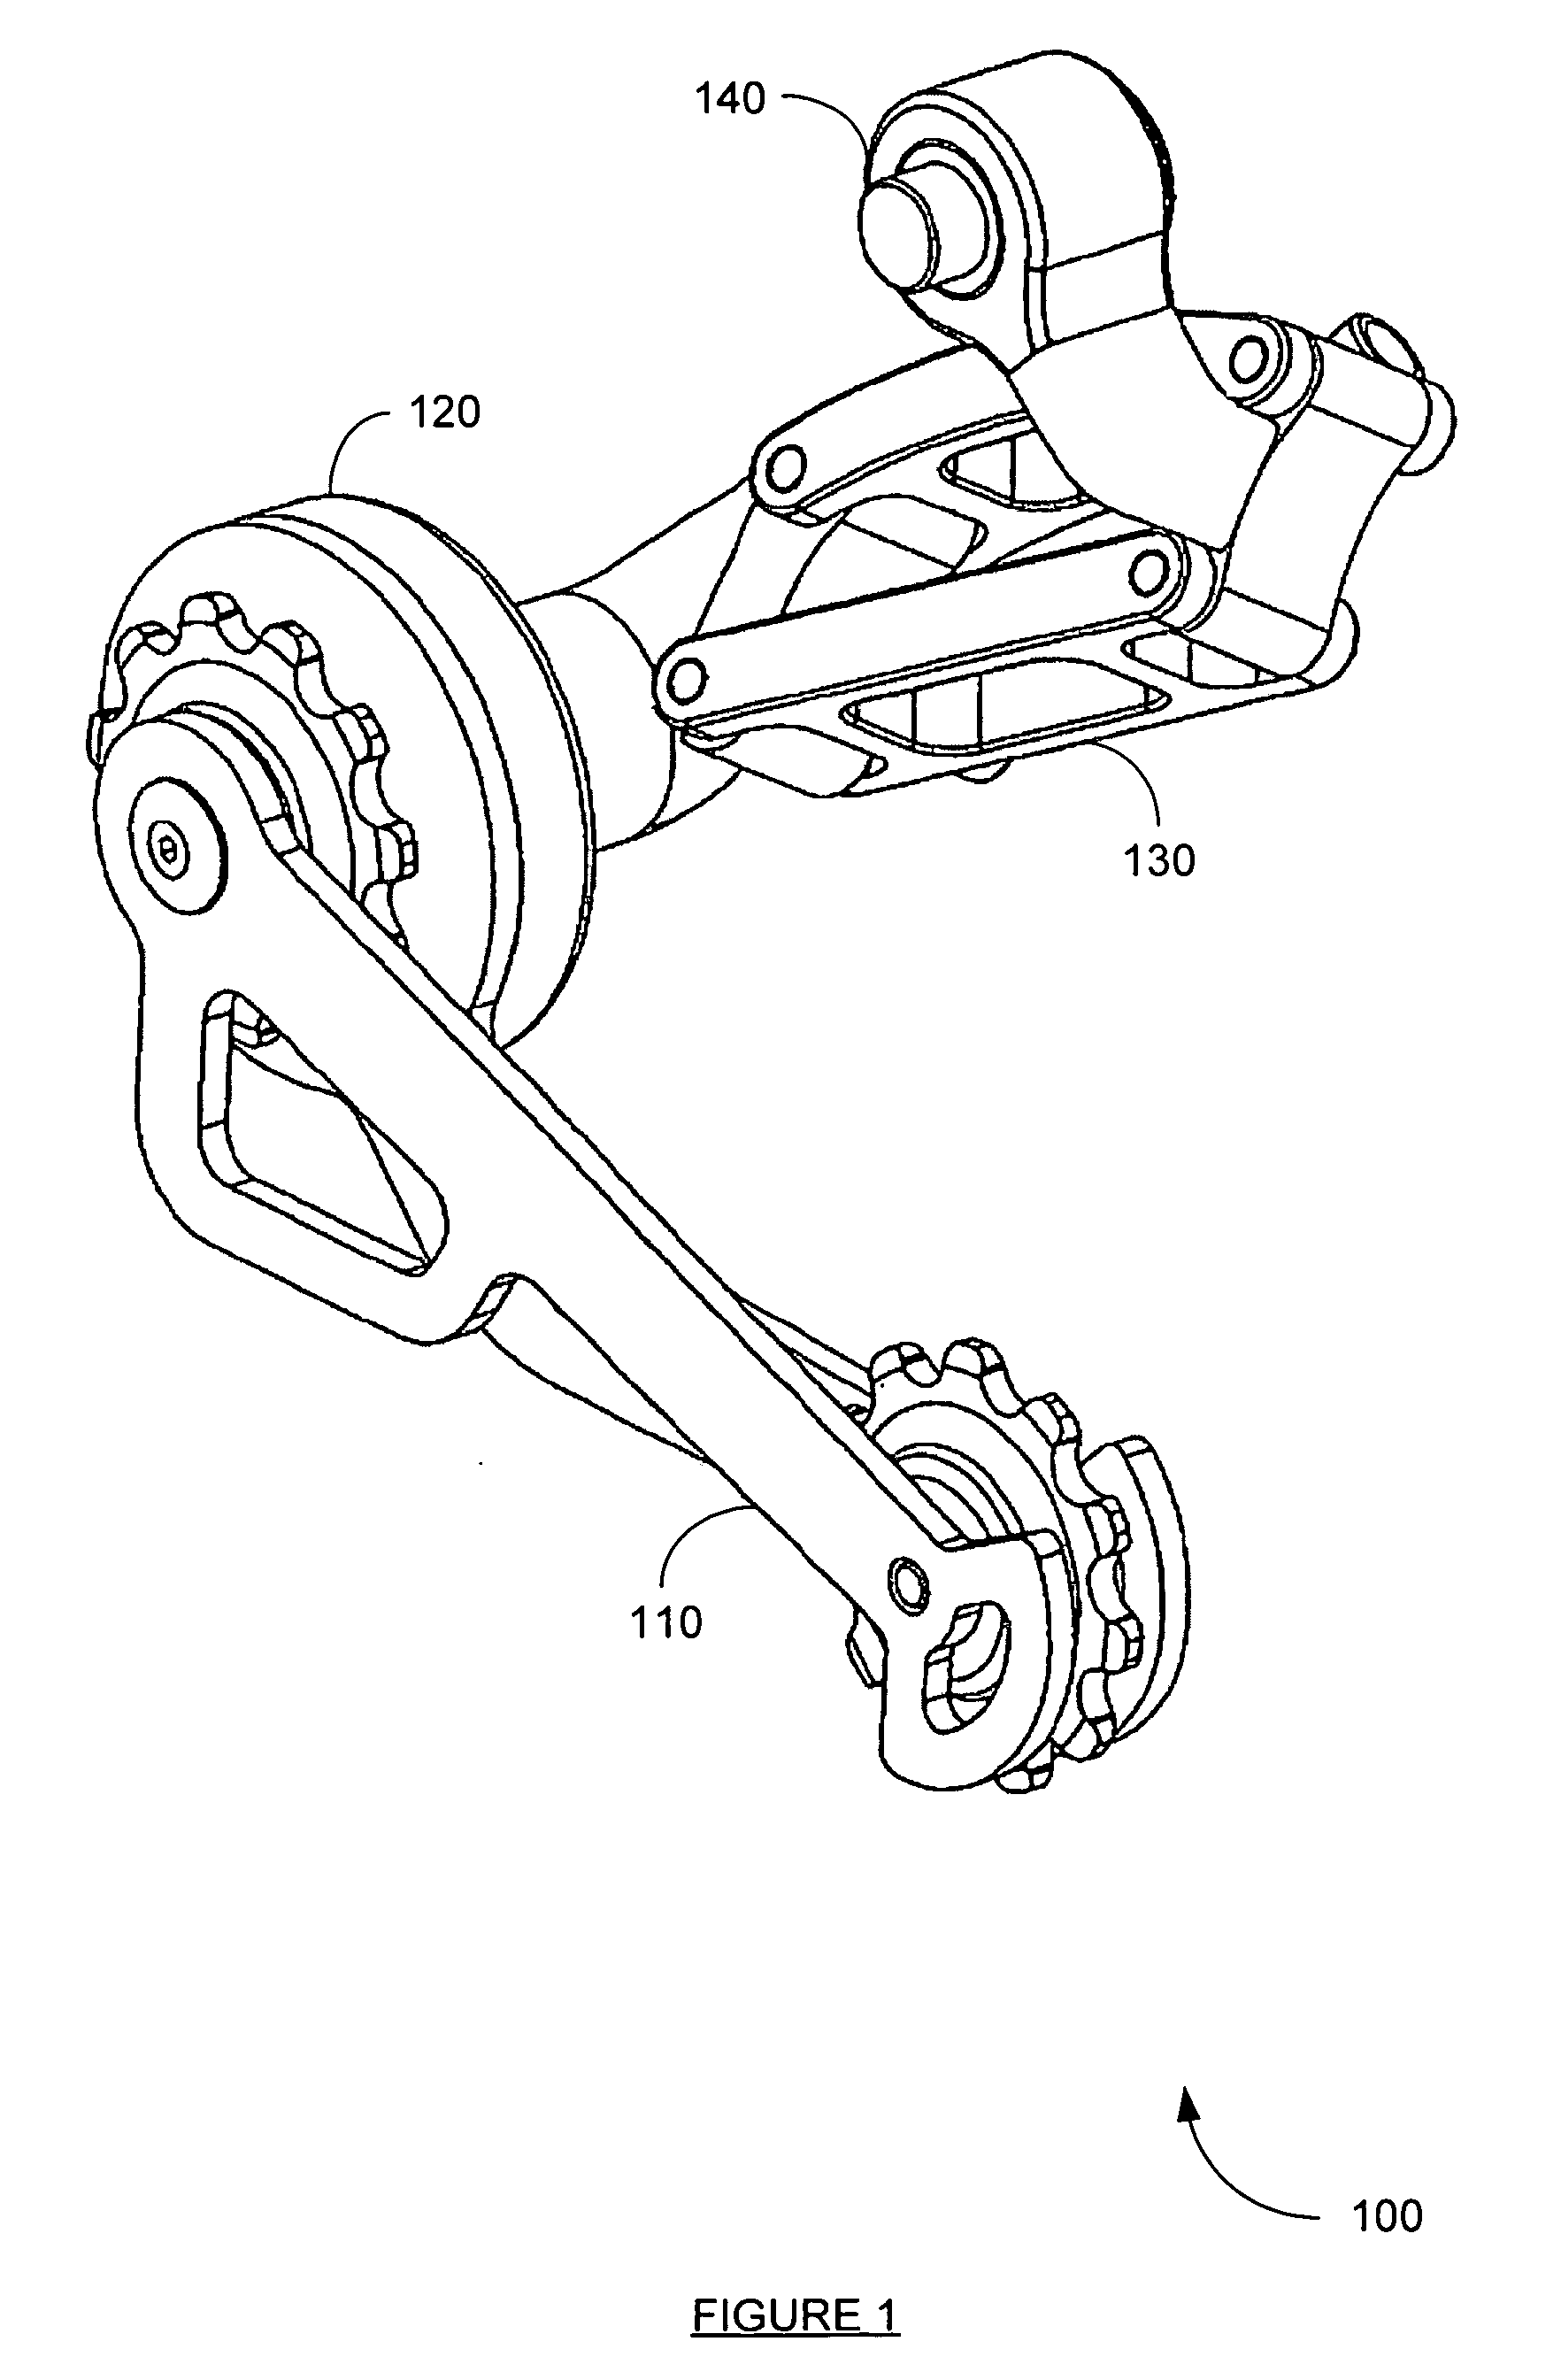 Fluid dampening chain tensioning device